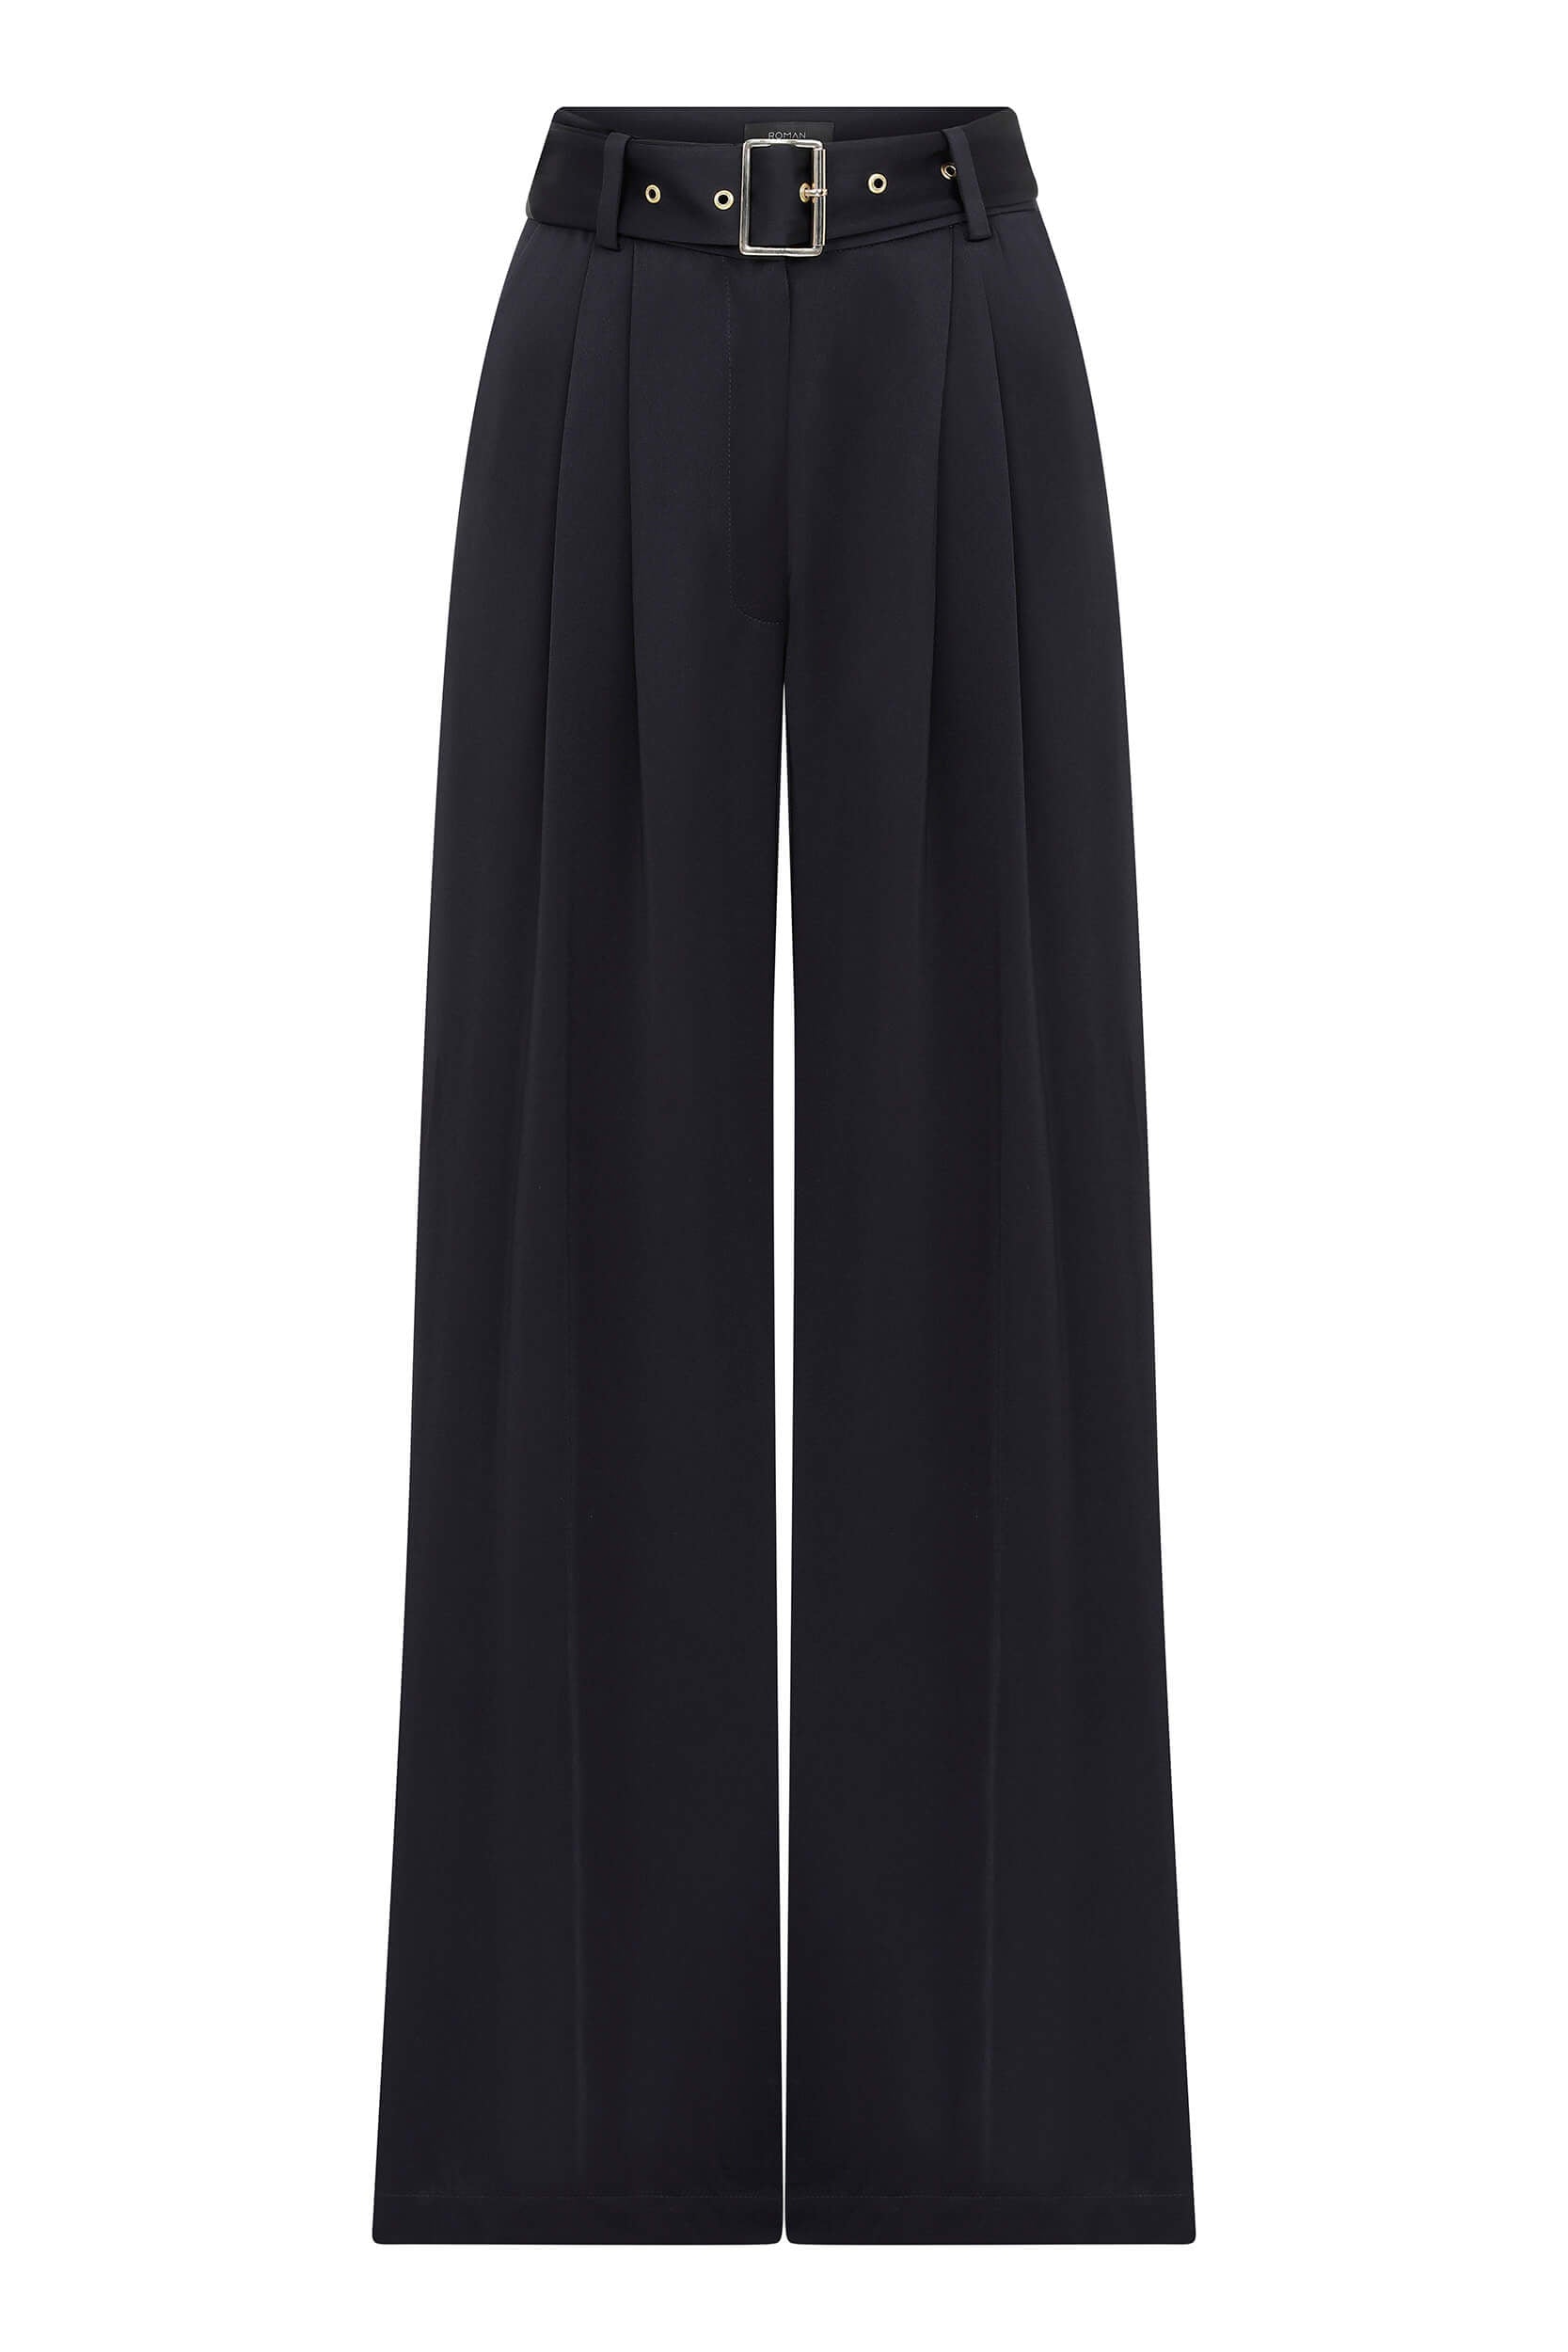 Roman Originals Wide Leg Trousers for Women UK Ladies Palazzo Pants Evening  Jersey Elasticated High Waist Smart Flared Culotte Office Work Going Out  Loose Crepe Bottoms - Black - Size 10 